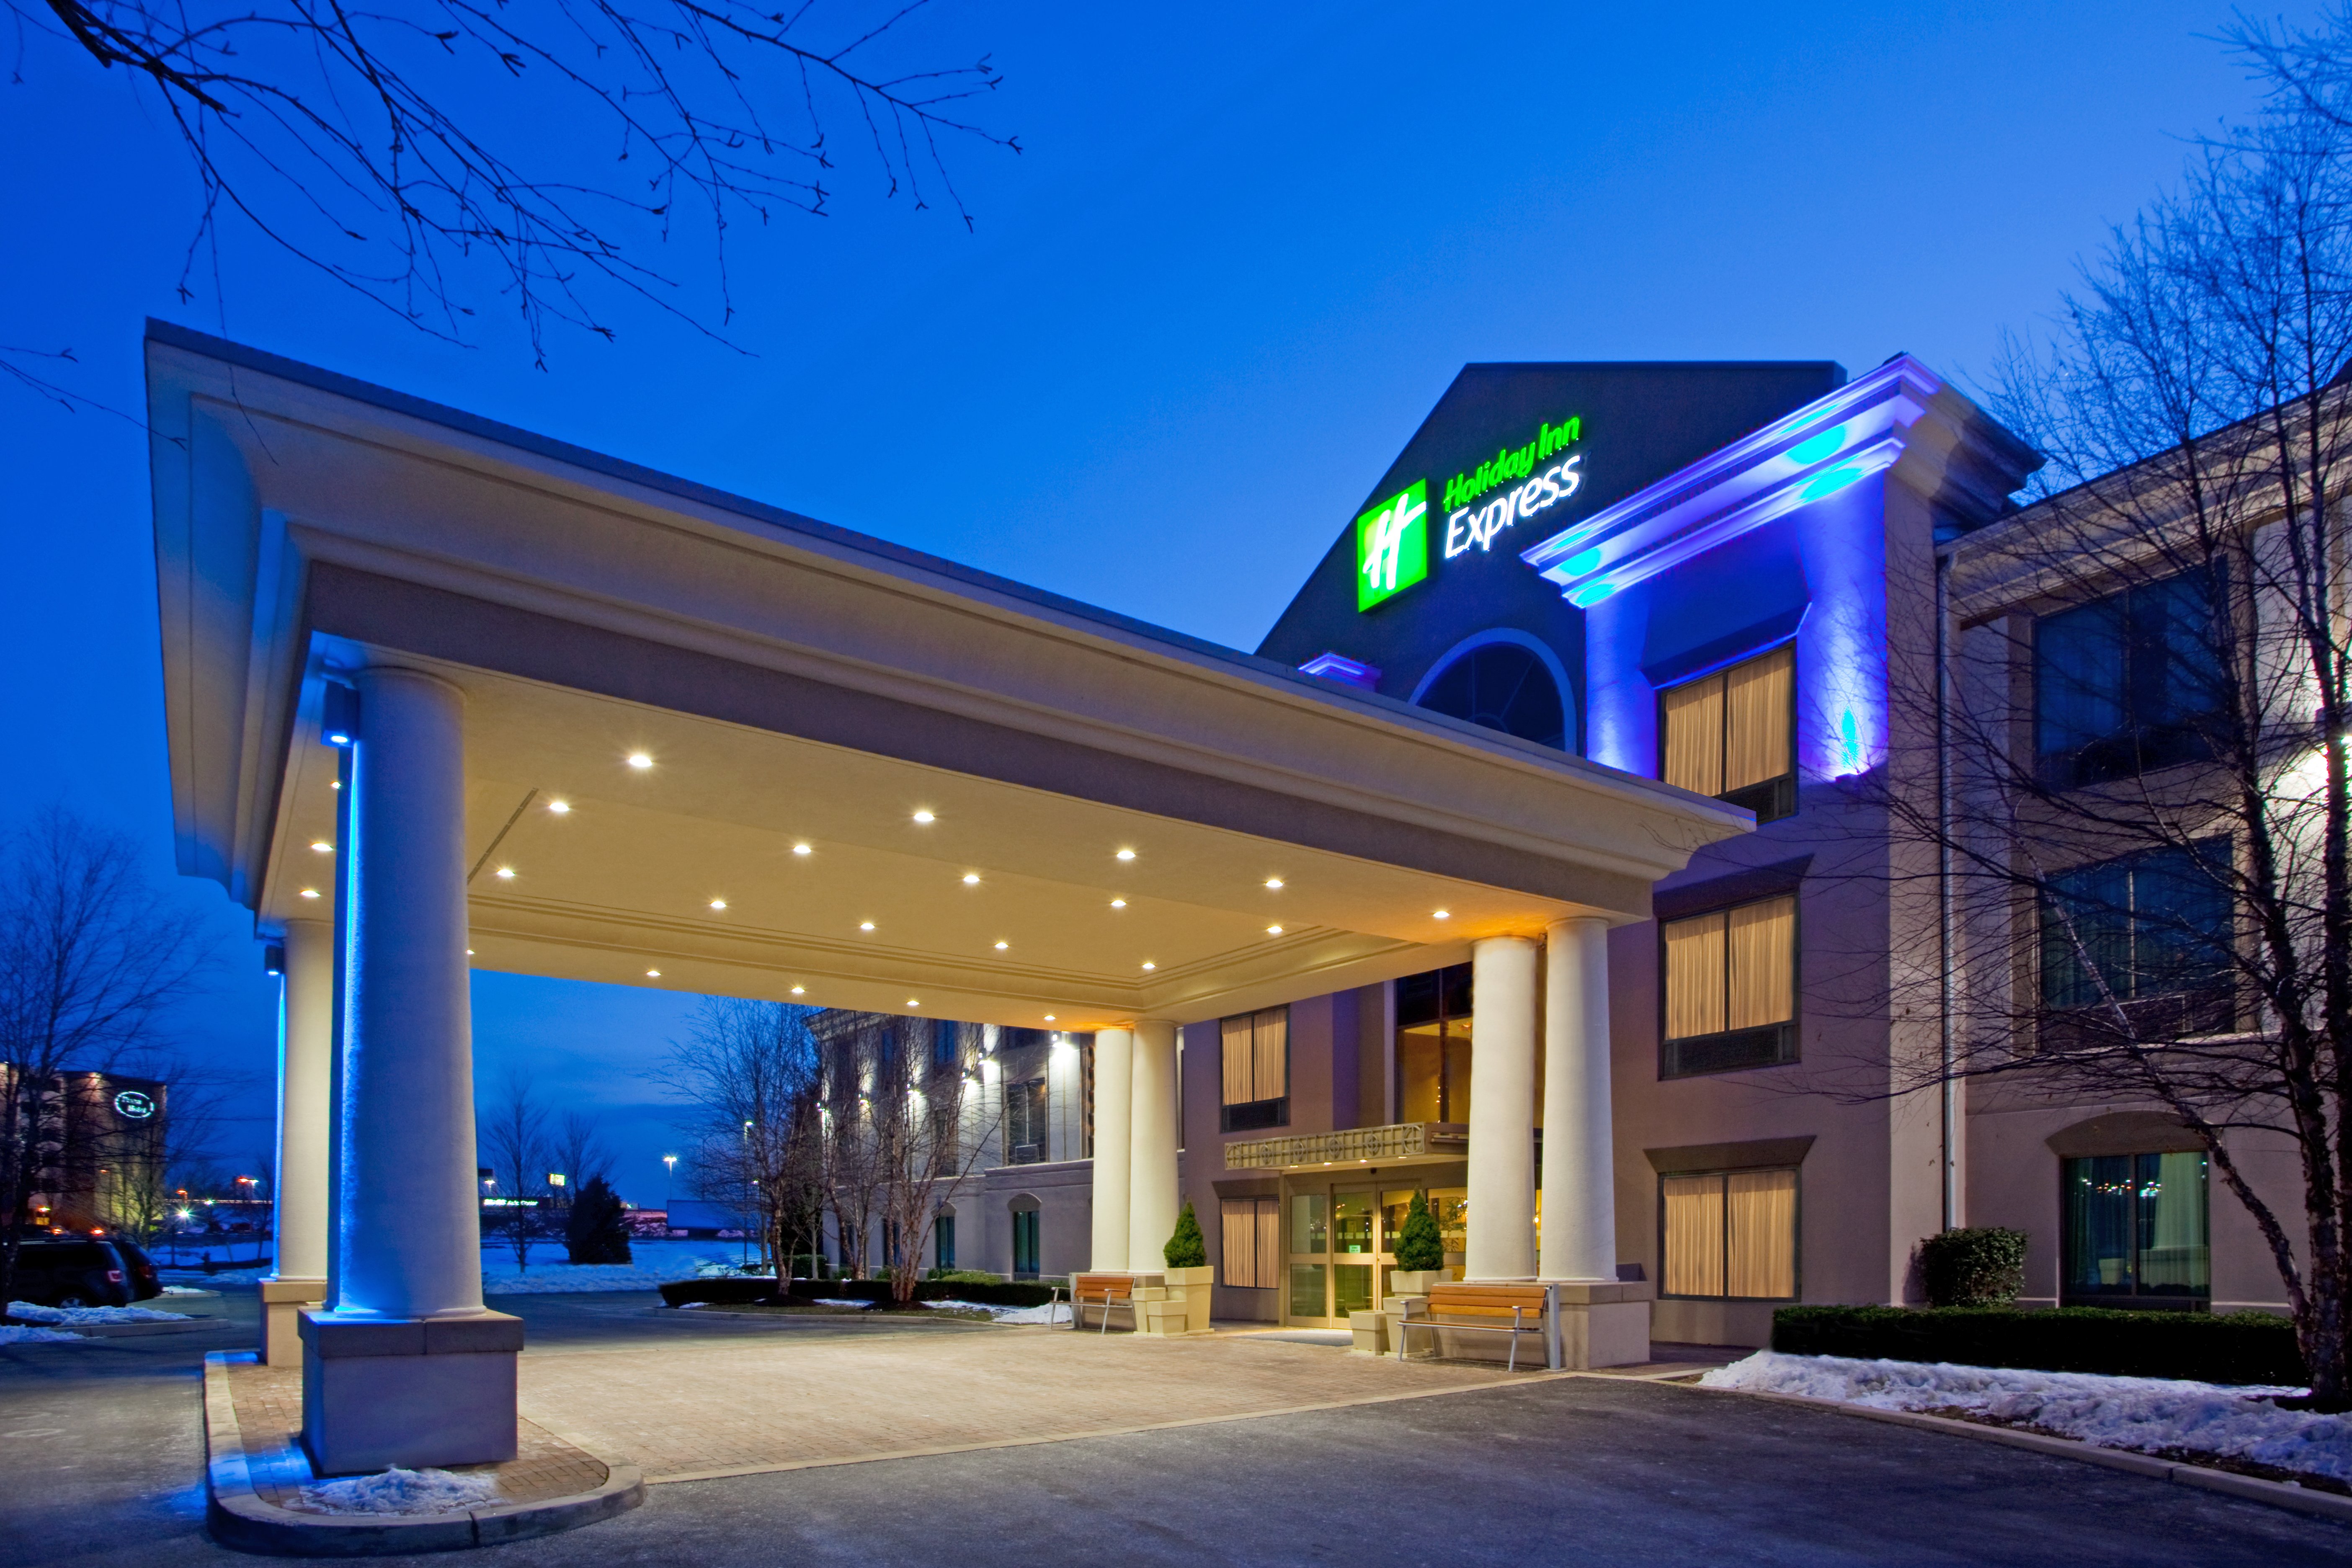 Hotel Entrance of the Holiday Inn Express and Suites Hagerstown